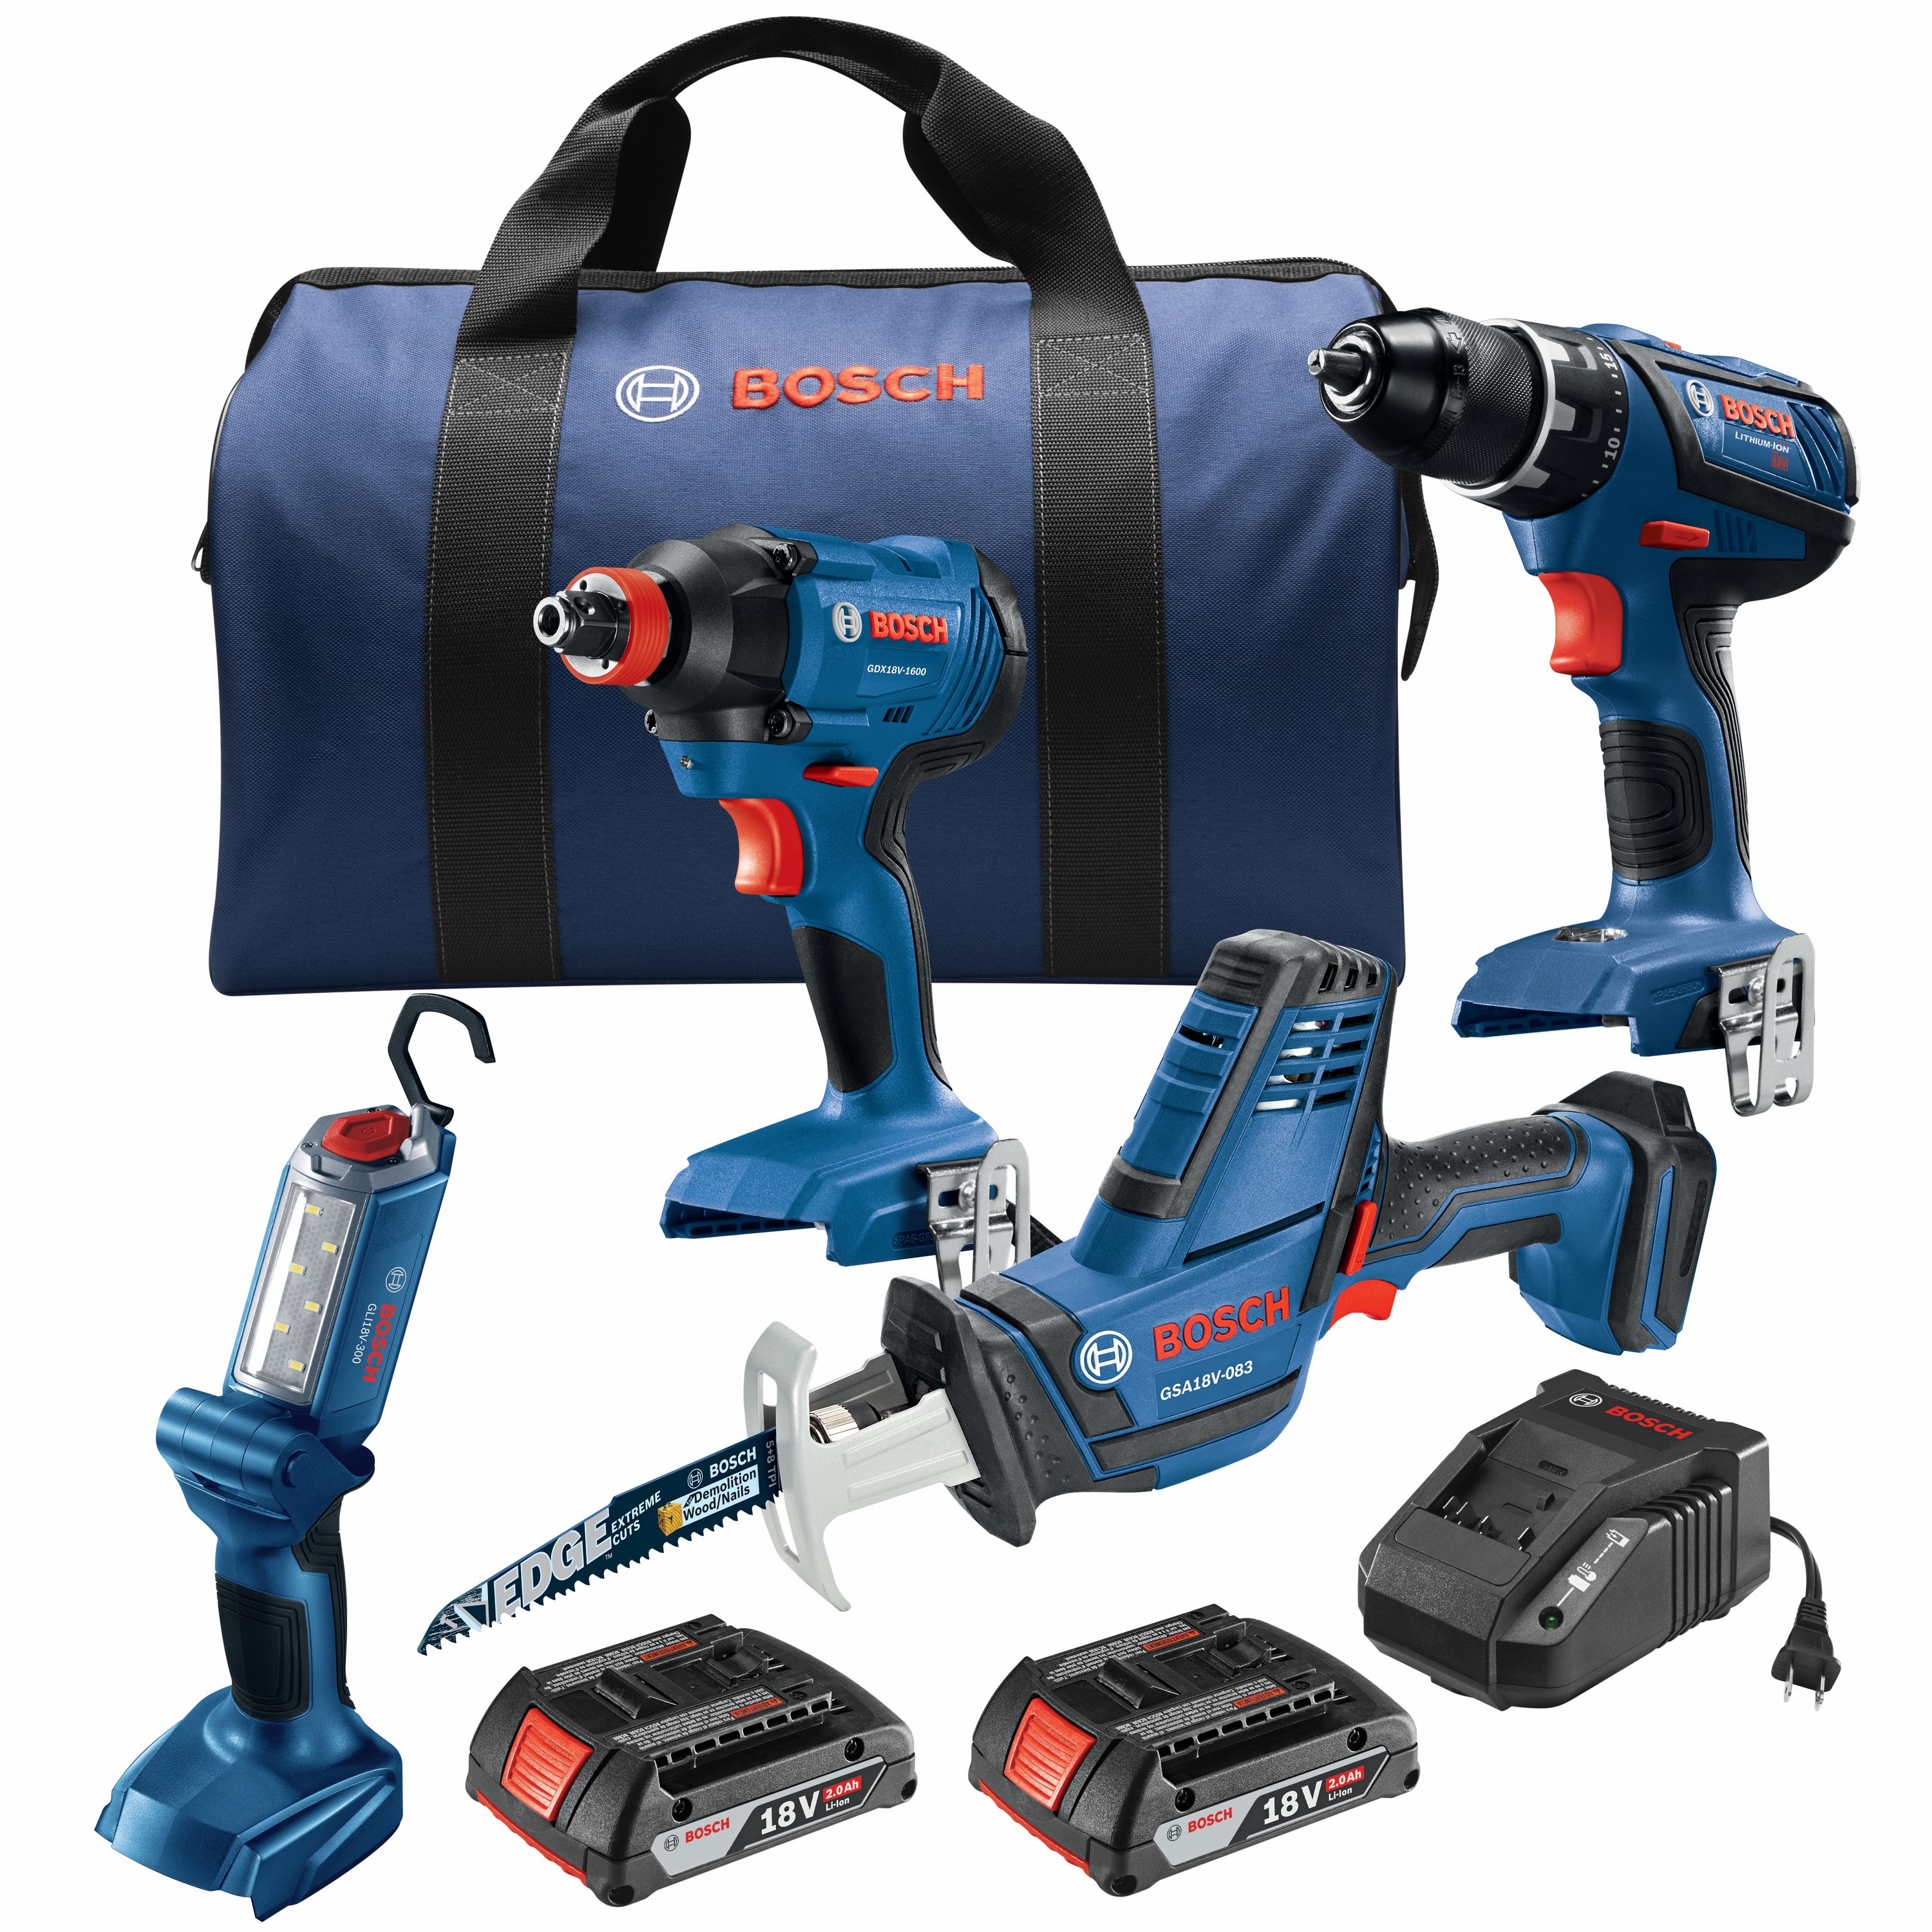 Bosch 4-Tool 18-volt Power Tool Combo Kit with Soft Case (2 Batteries Included and Charger Included) in Power Tool Combo Kits department at Lowes.com